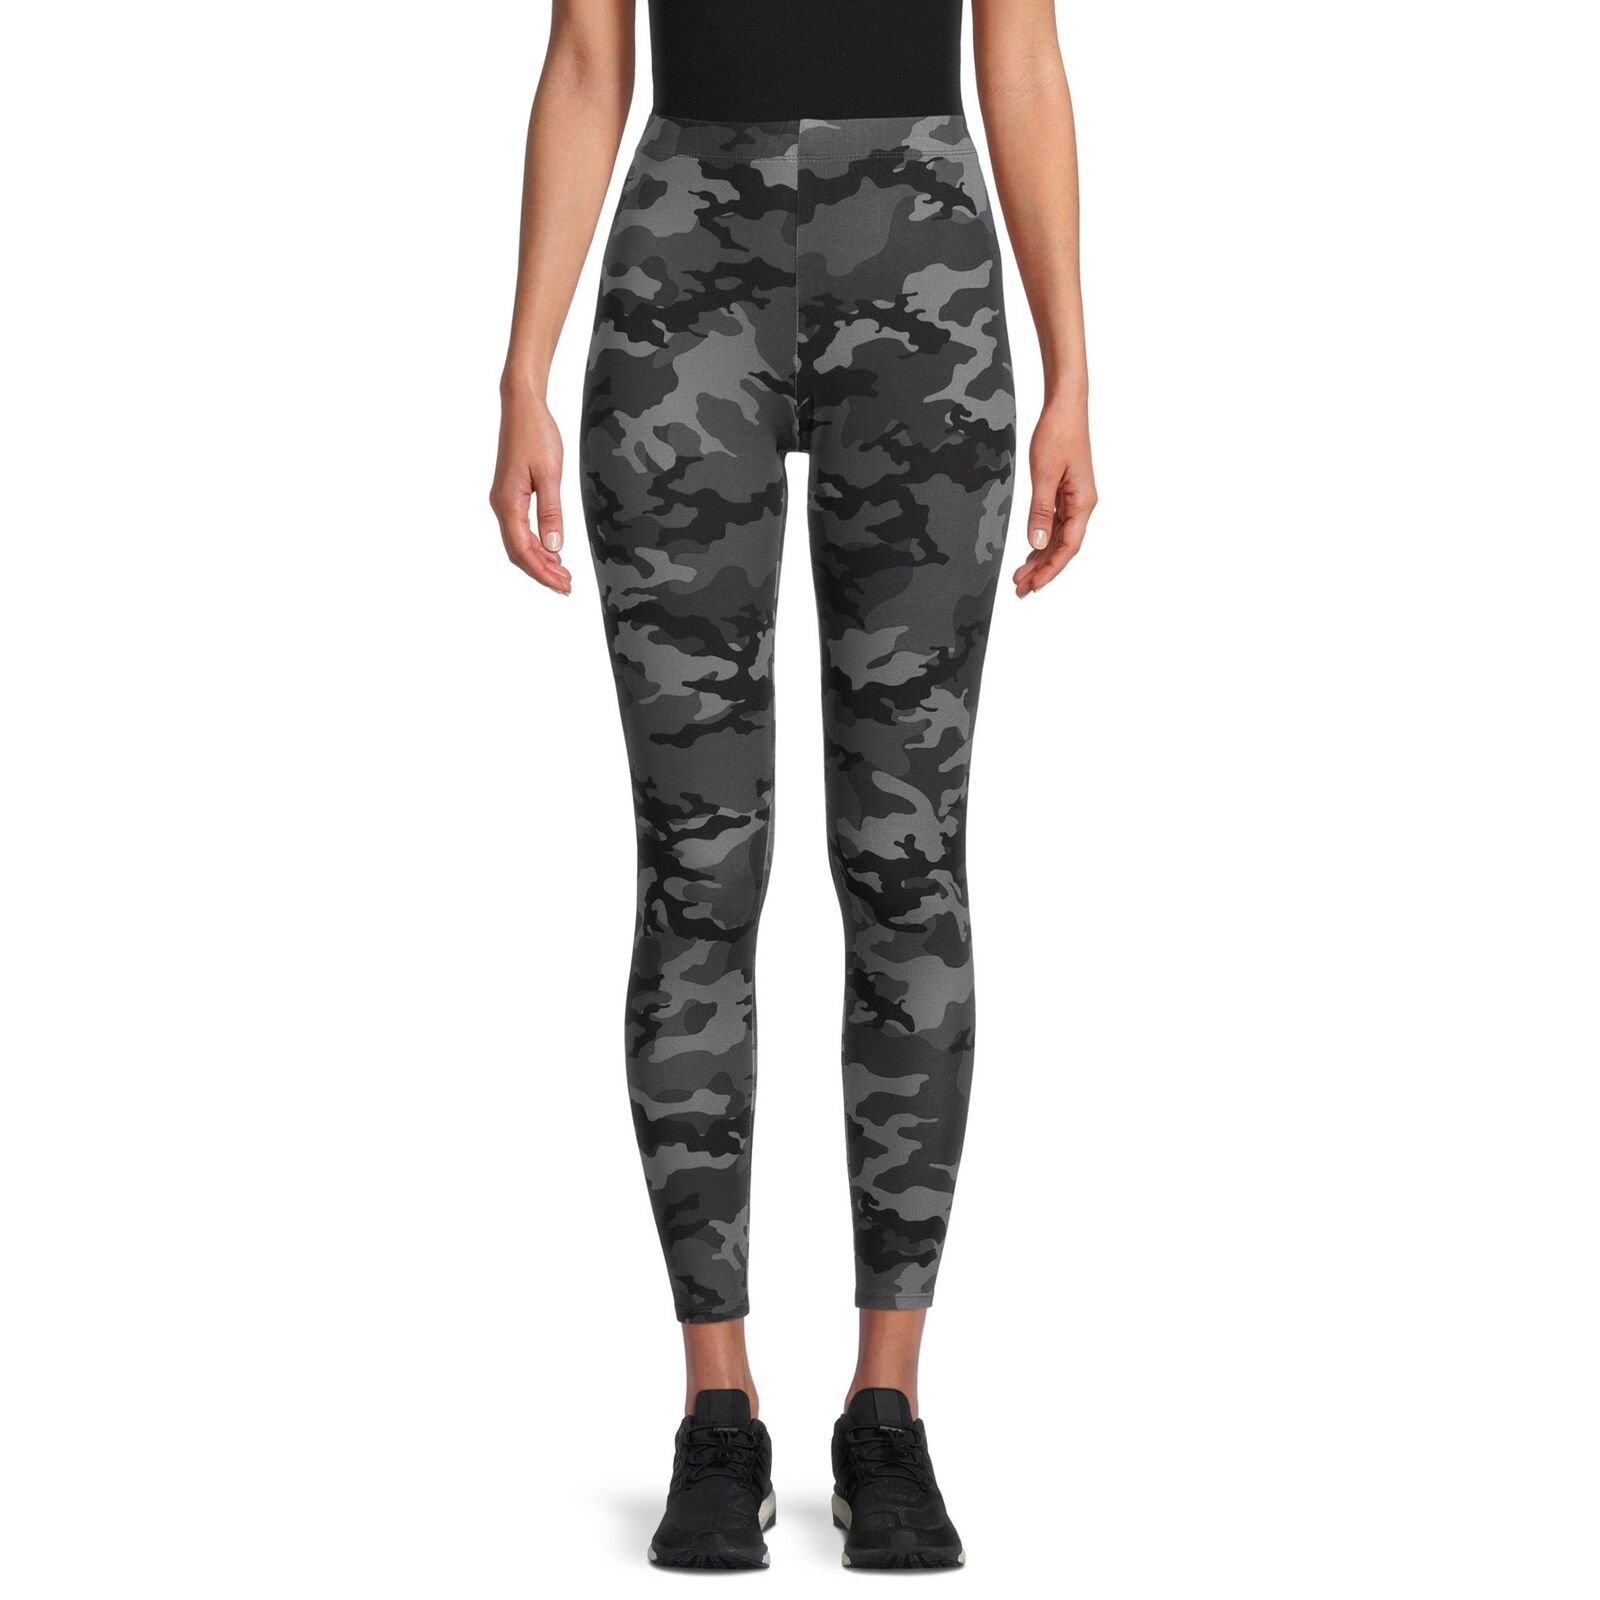 Primary image for No Boundaries Junior's Print Ankle Leggings  Gray Camouflage Camo Size S (3-5)